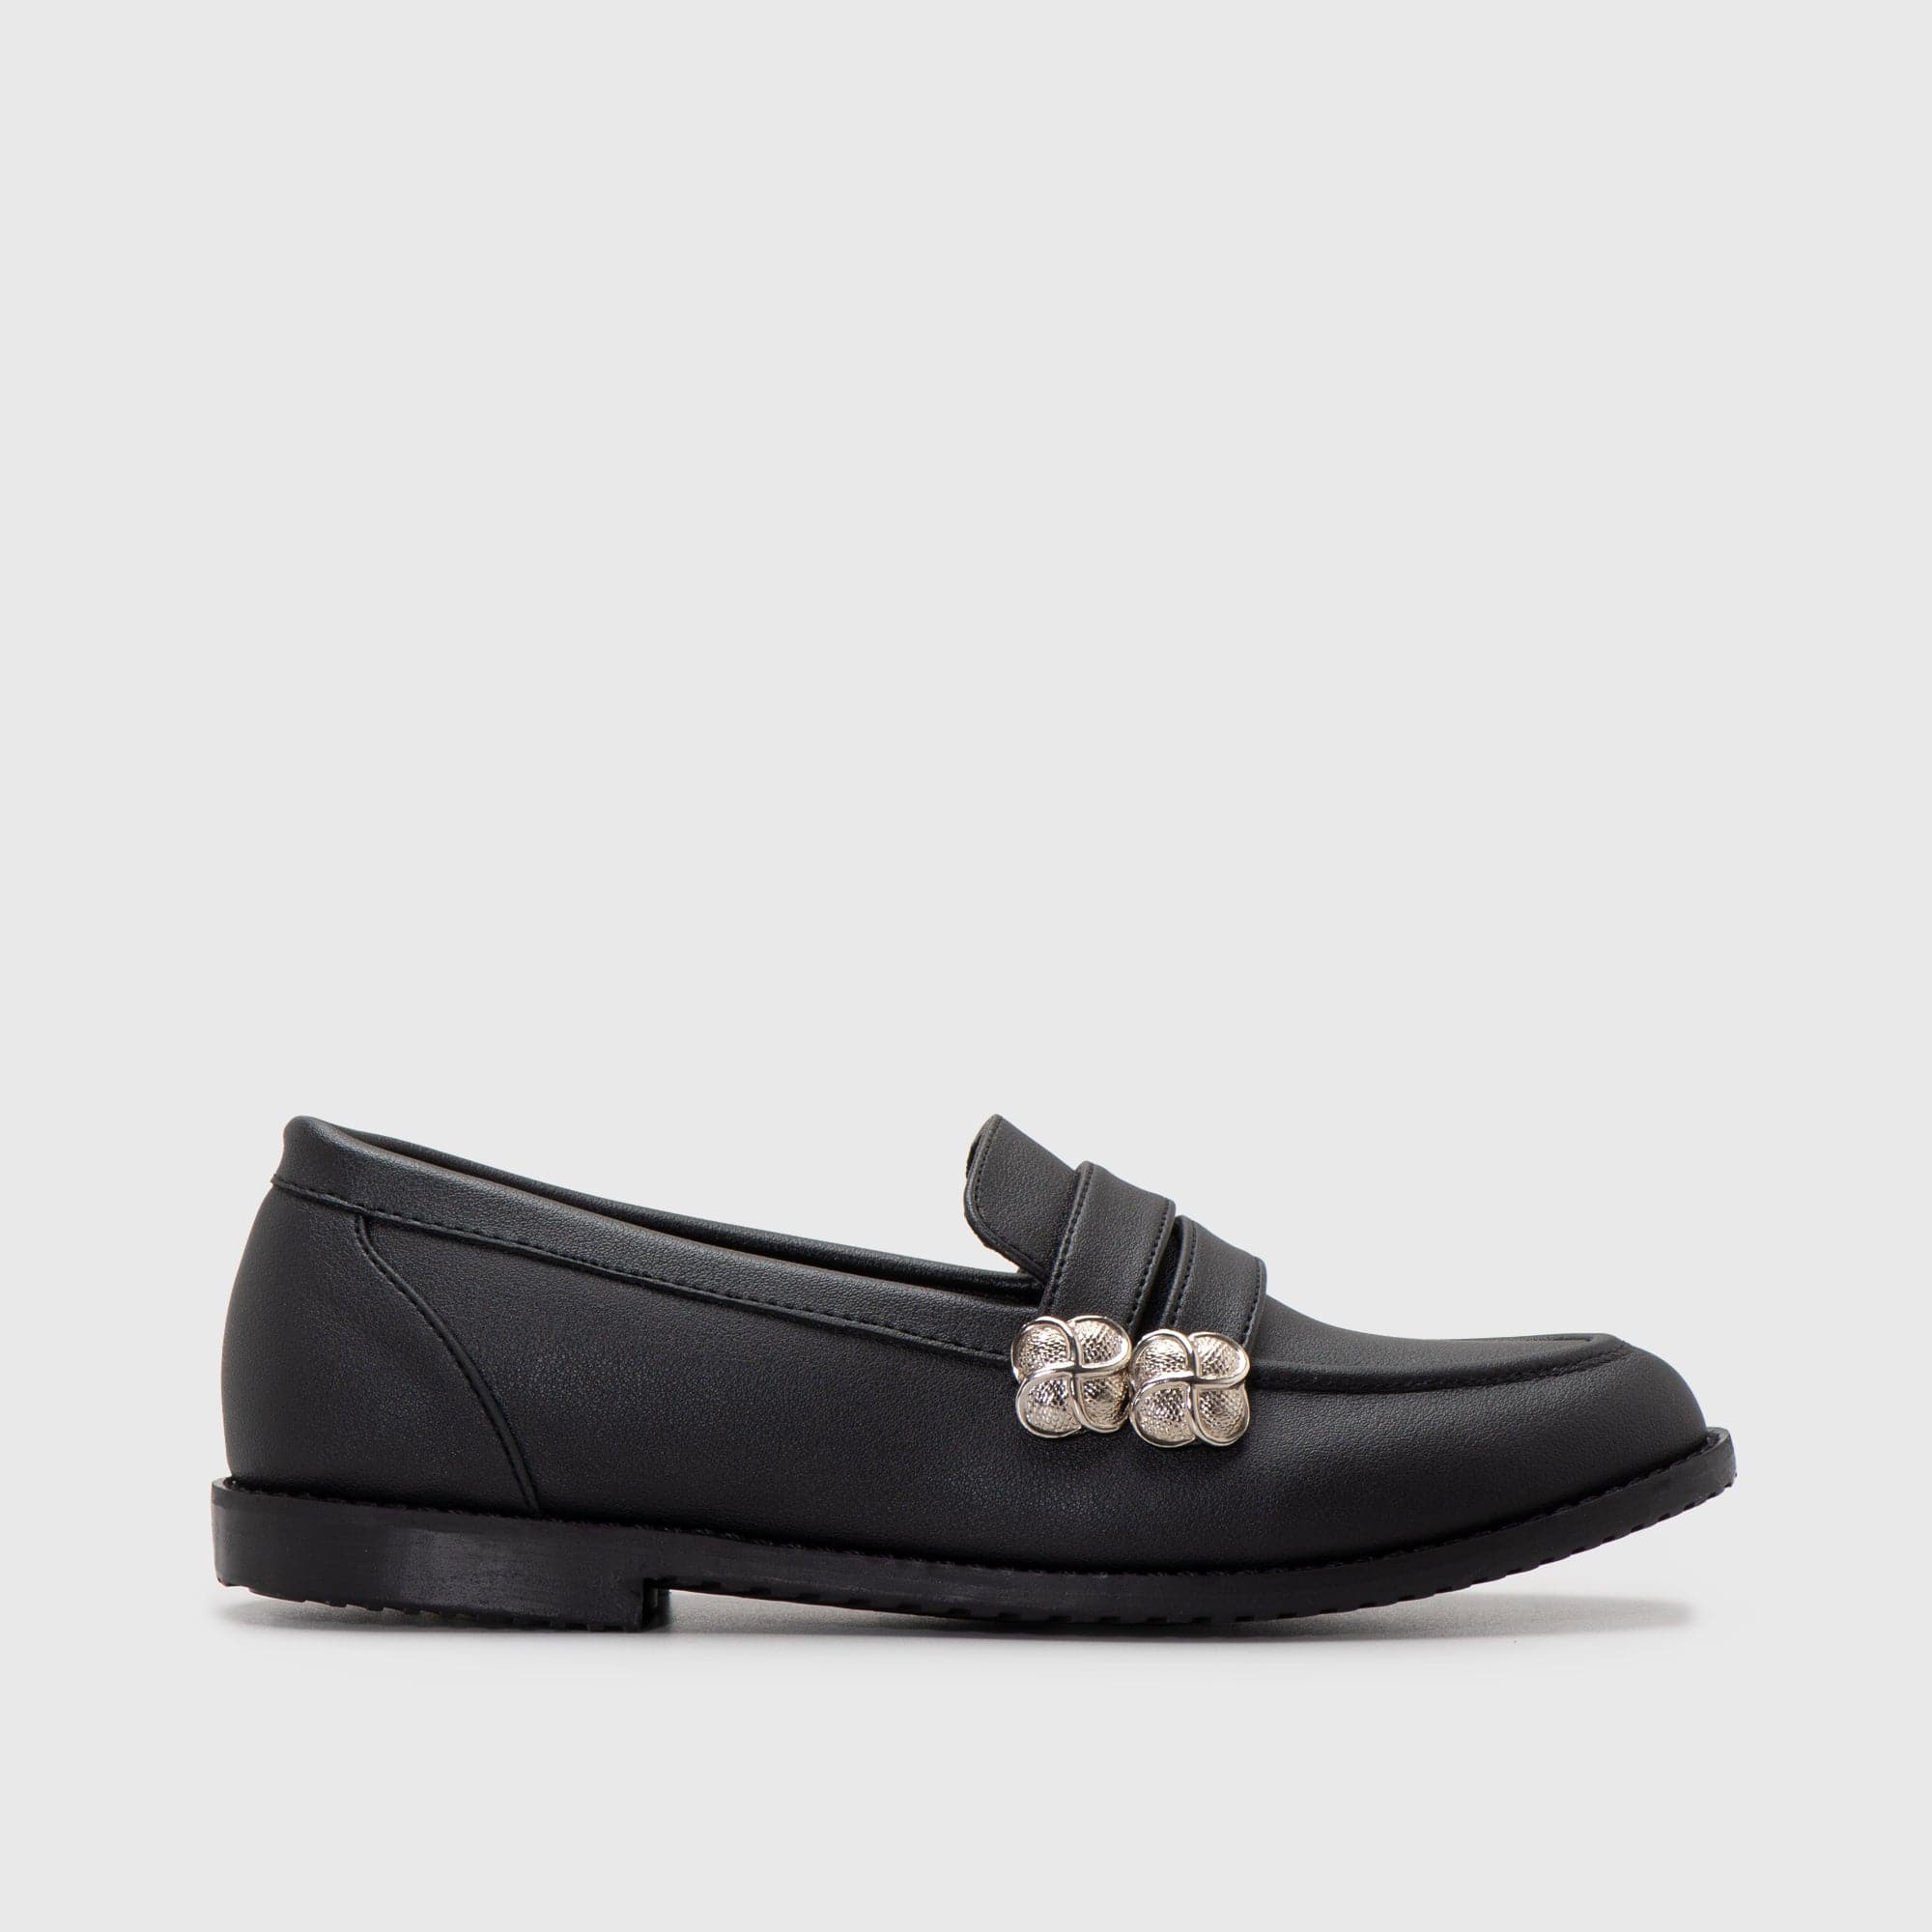 Adorable Projects Official Adorableprojects - Maira Flatshoes Black - Loafer Wanita